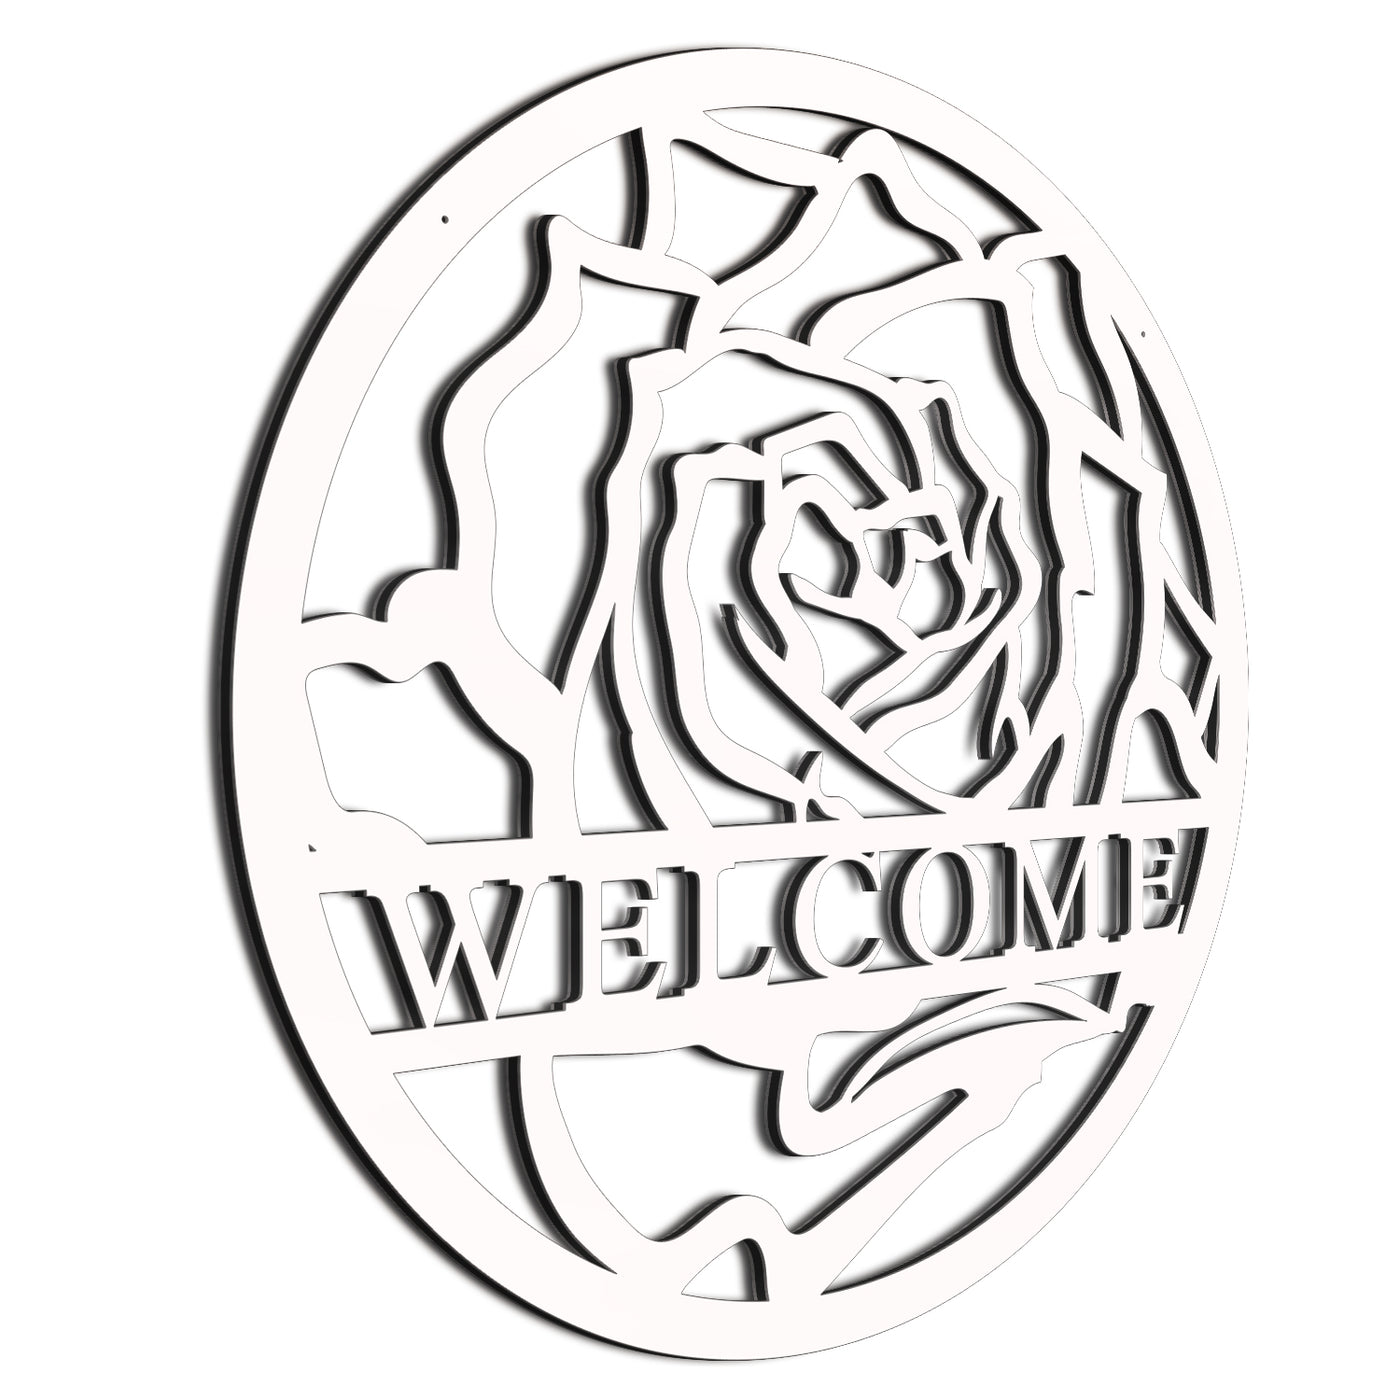 White Rose Weclome Sign